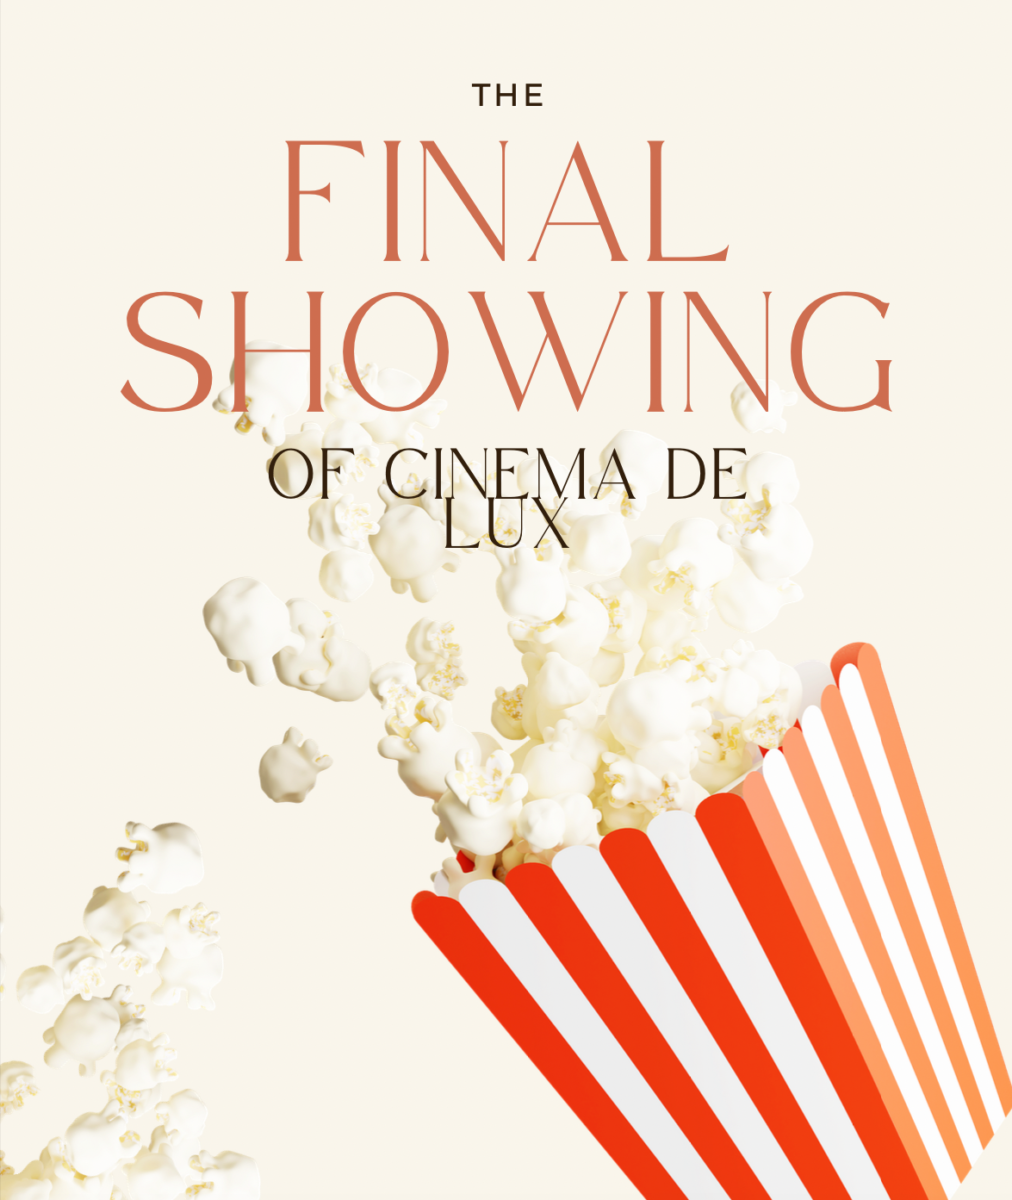 October 29th will mark both the final day of business for Cinema De Lux.